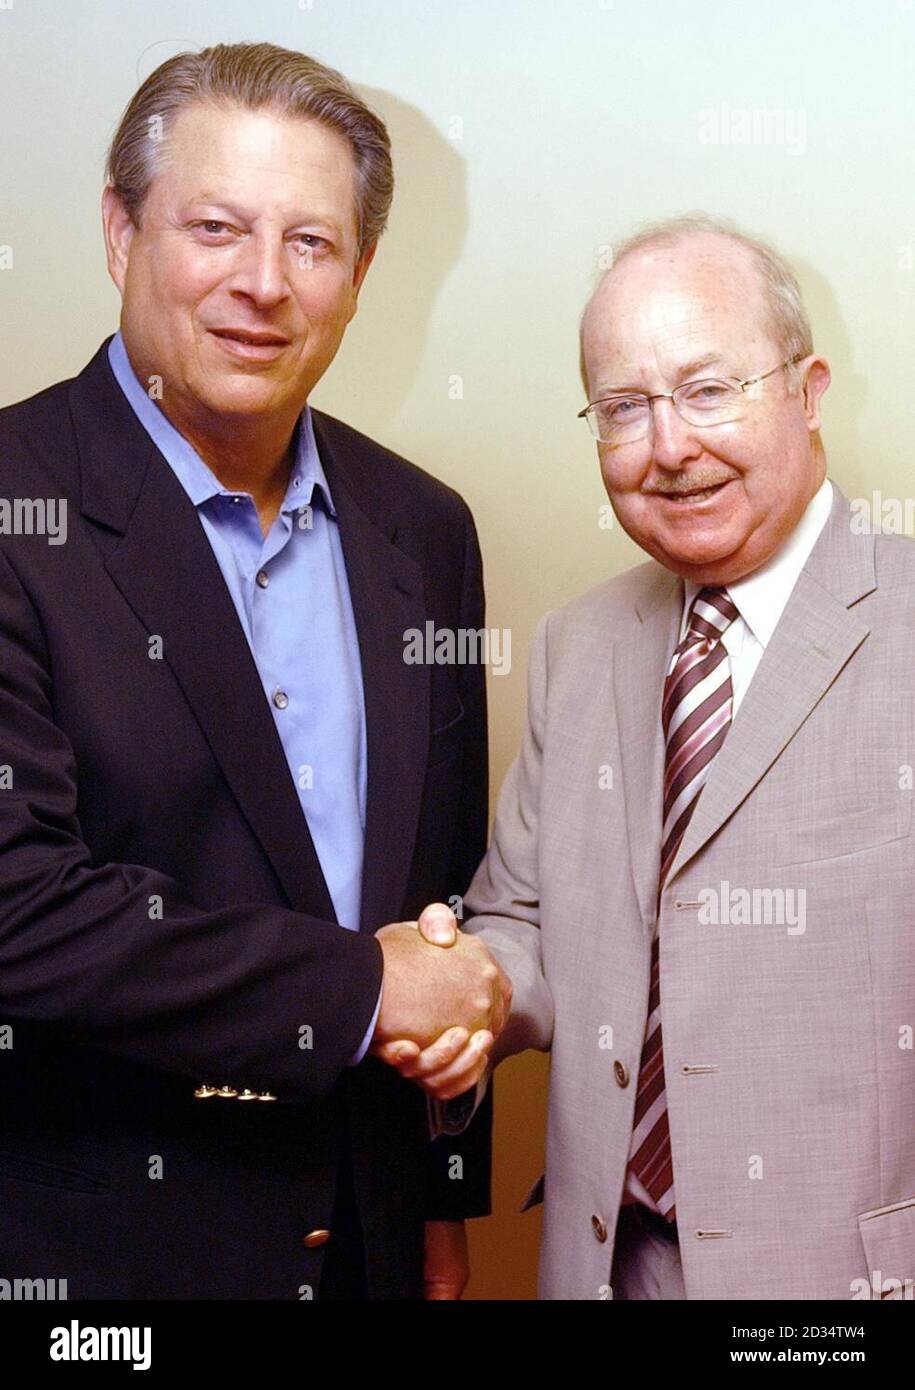 Former US vice-president Al Gore (left) and Minister for the Environment and Rural Development, MPS Ross Finnie, meet during Edinburgh International Film Festival at Cineworld. Stock Photo